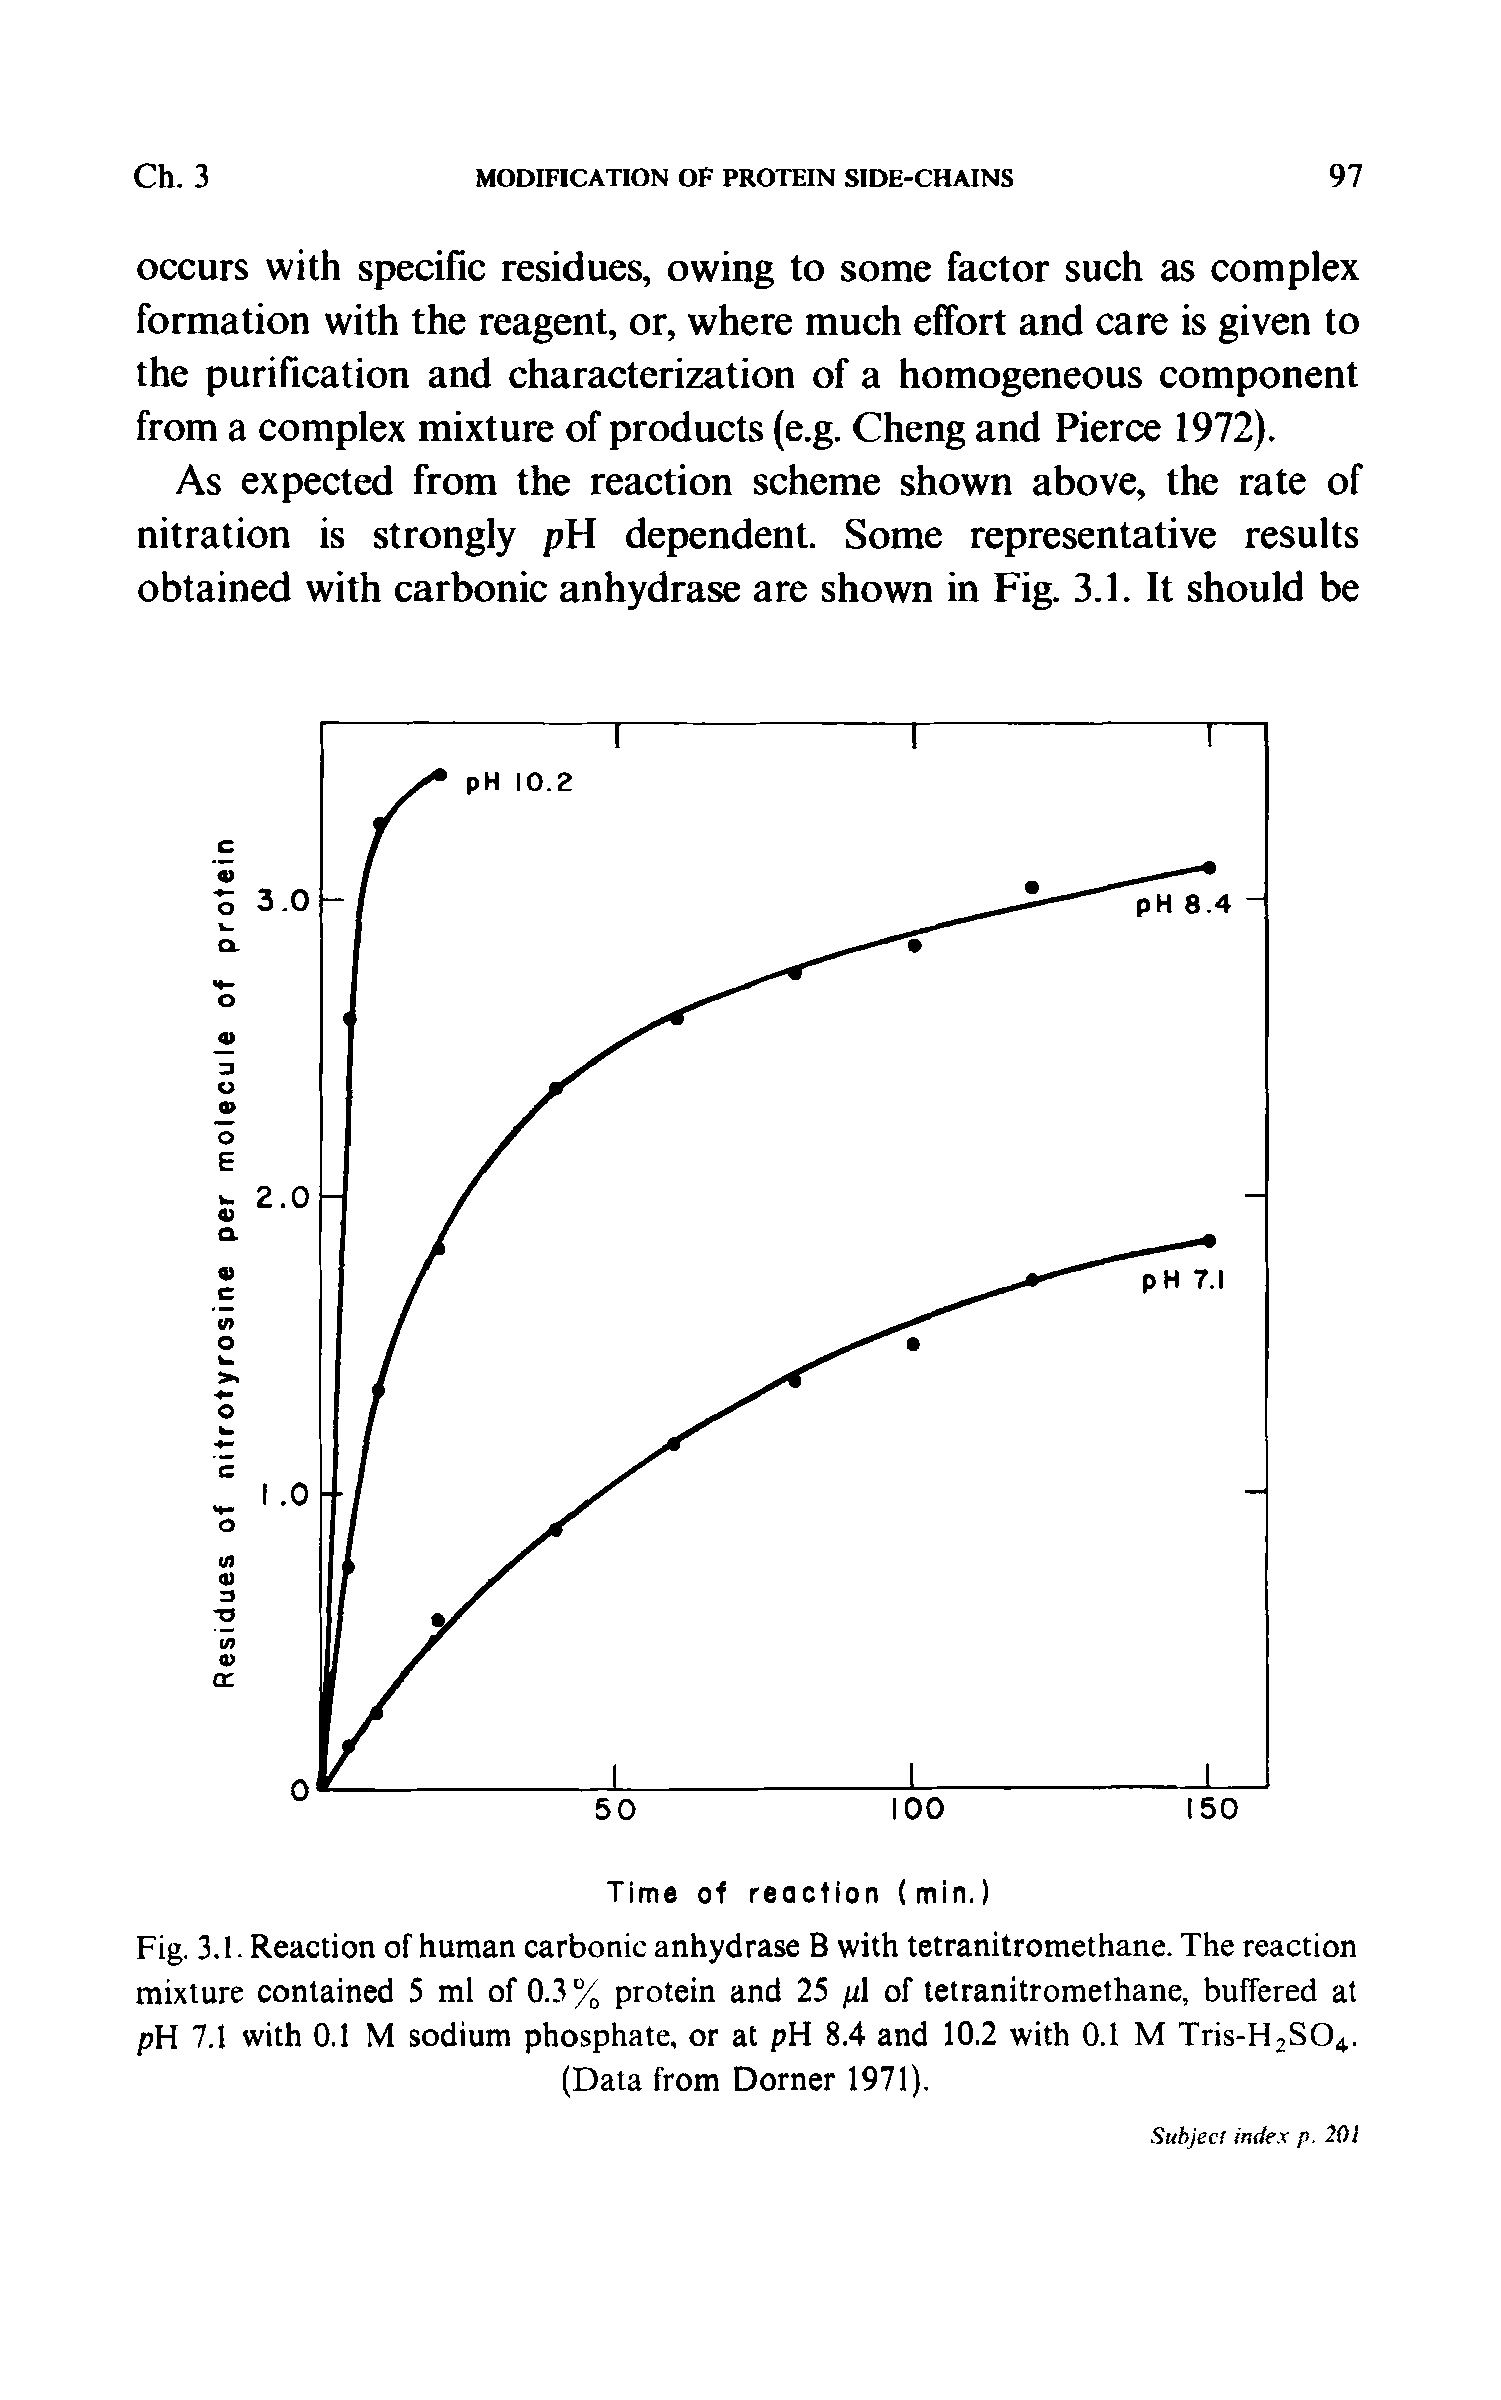 Fig. 3.1. Reaction of human carbonic anhydrase B with tetranitromethane. The reaction mixture contained 5 ml of 0.3 % protein and 25 /il of tetranitromethane, buffered at pH 7.1 with O.I M sodium phosphate, or at pH 8.4 and 10.2 with 0.1 M Tris-H2S04. (Data from Dorner 1971).